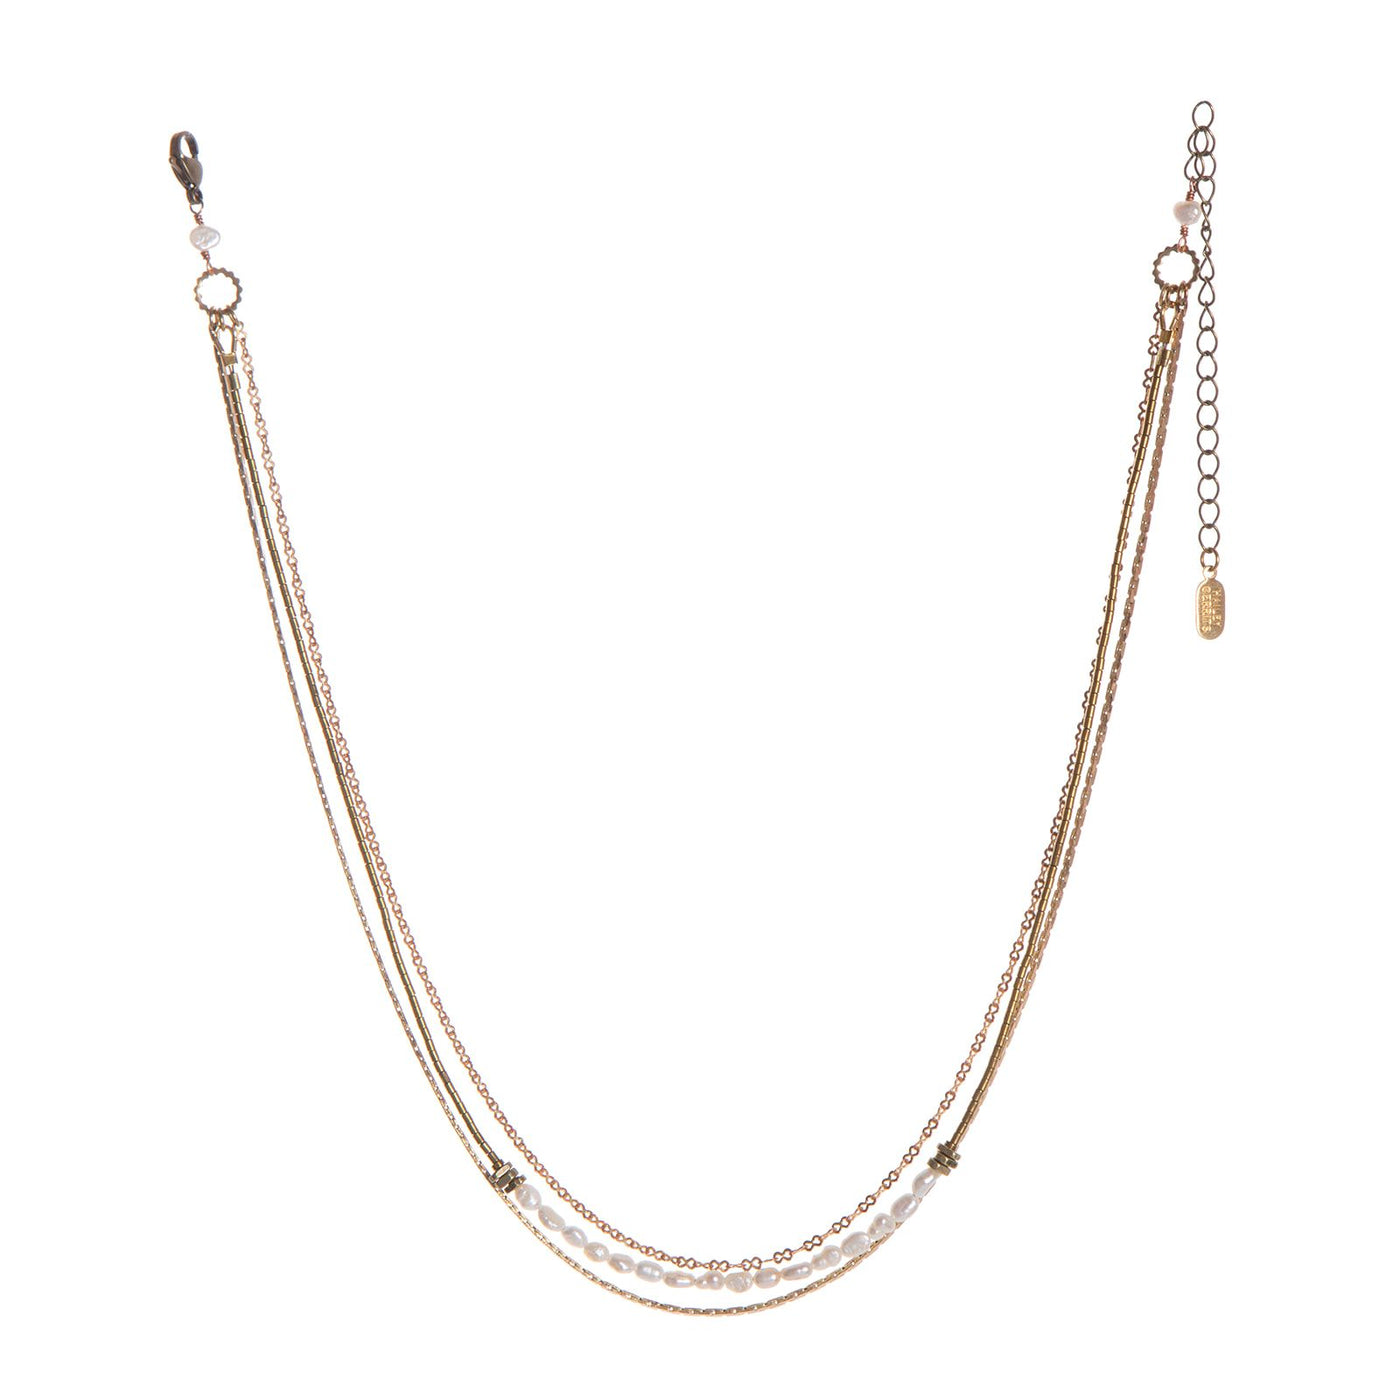 Akino Pearl Necklace - Hailey Gerrits